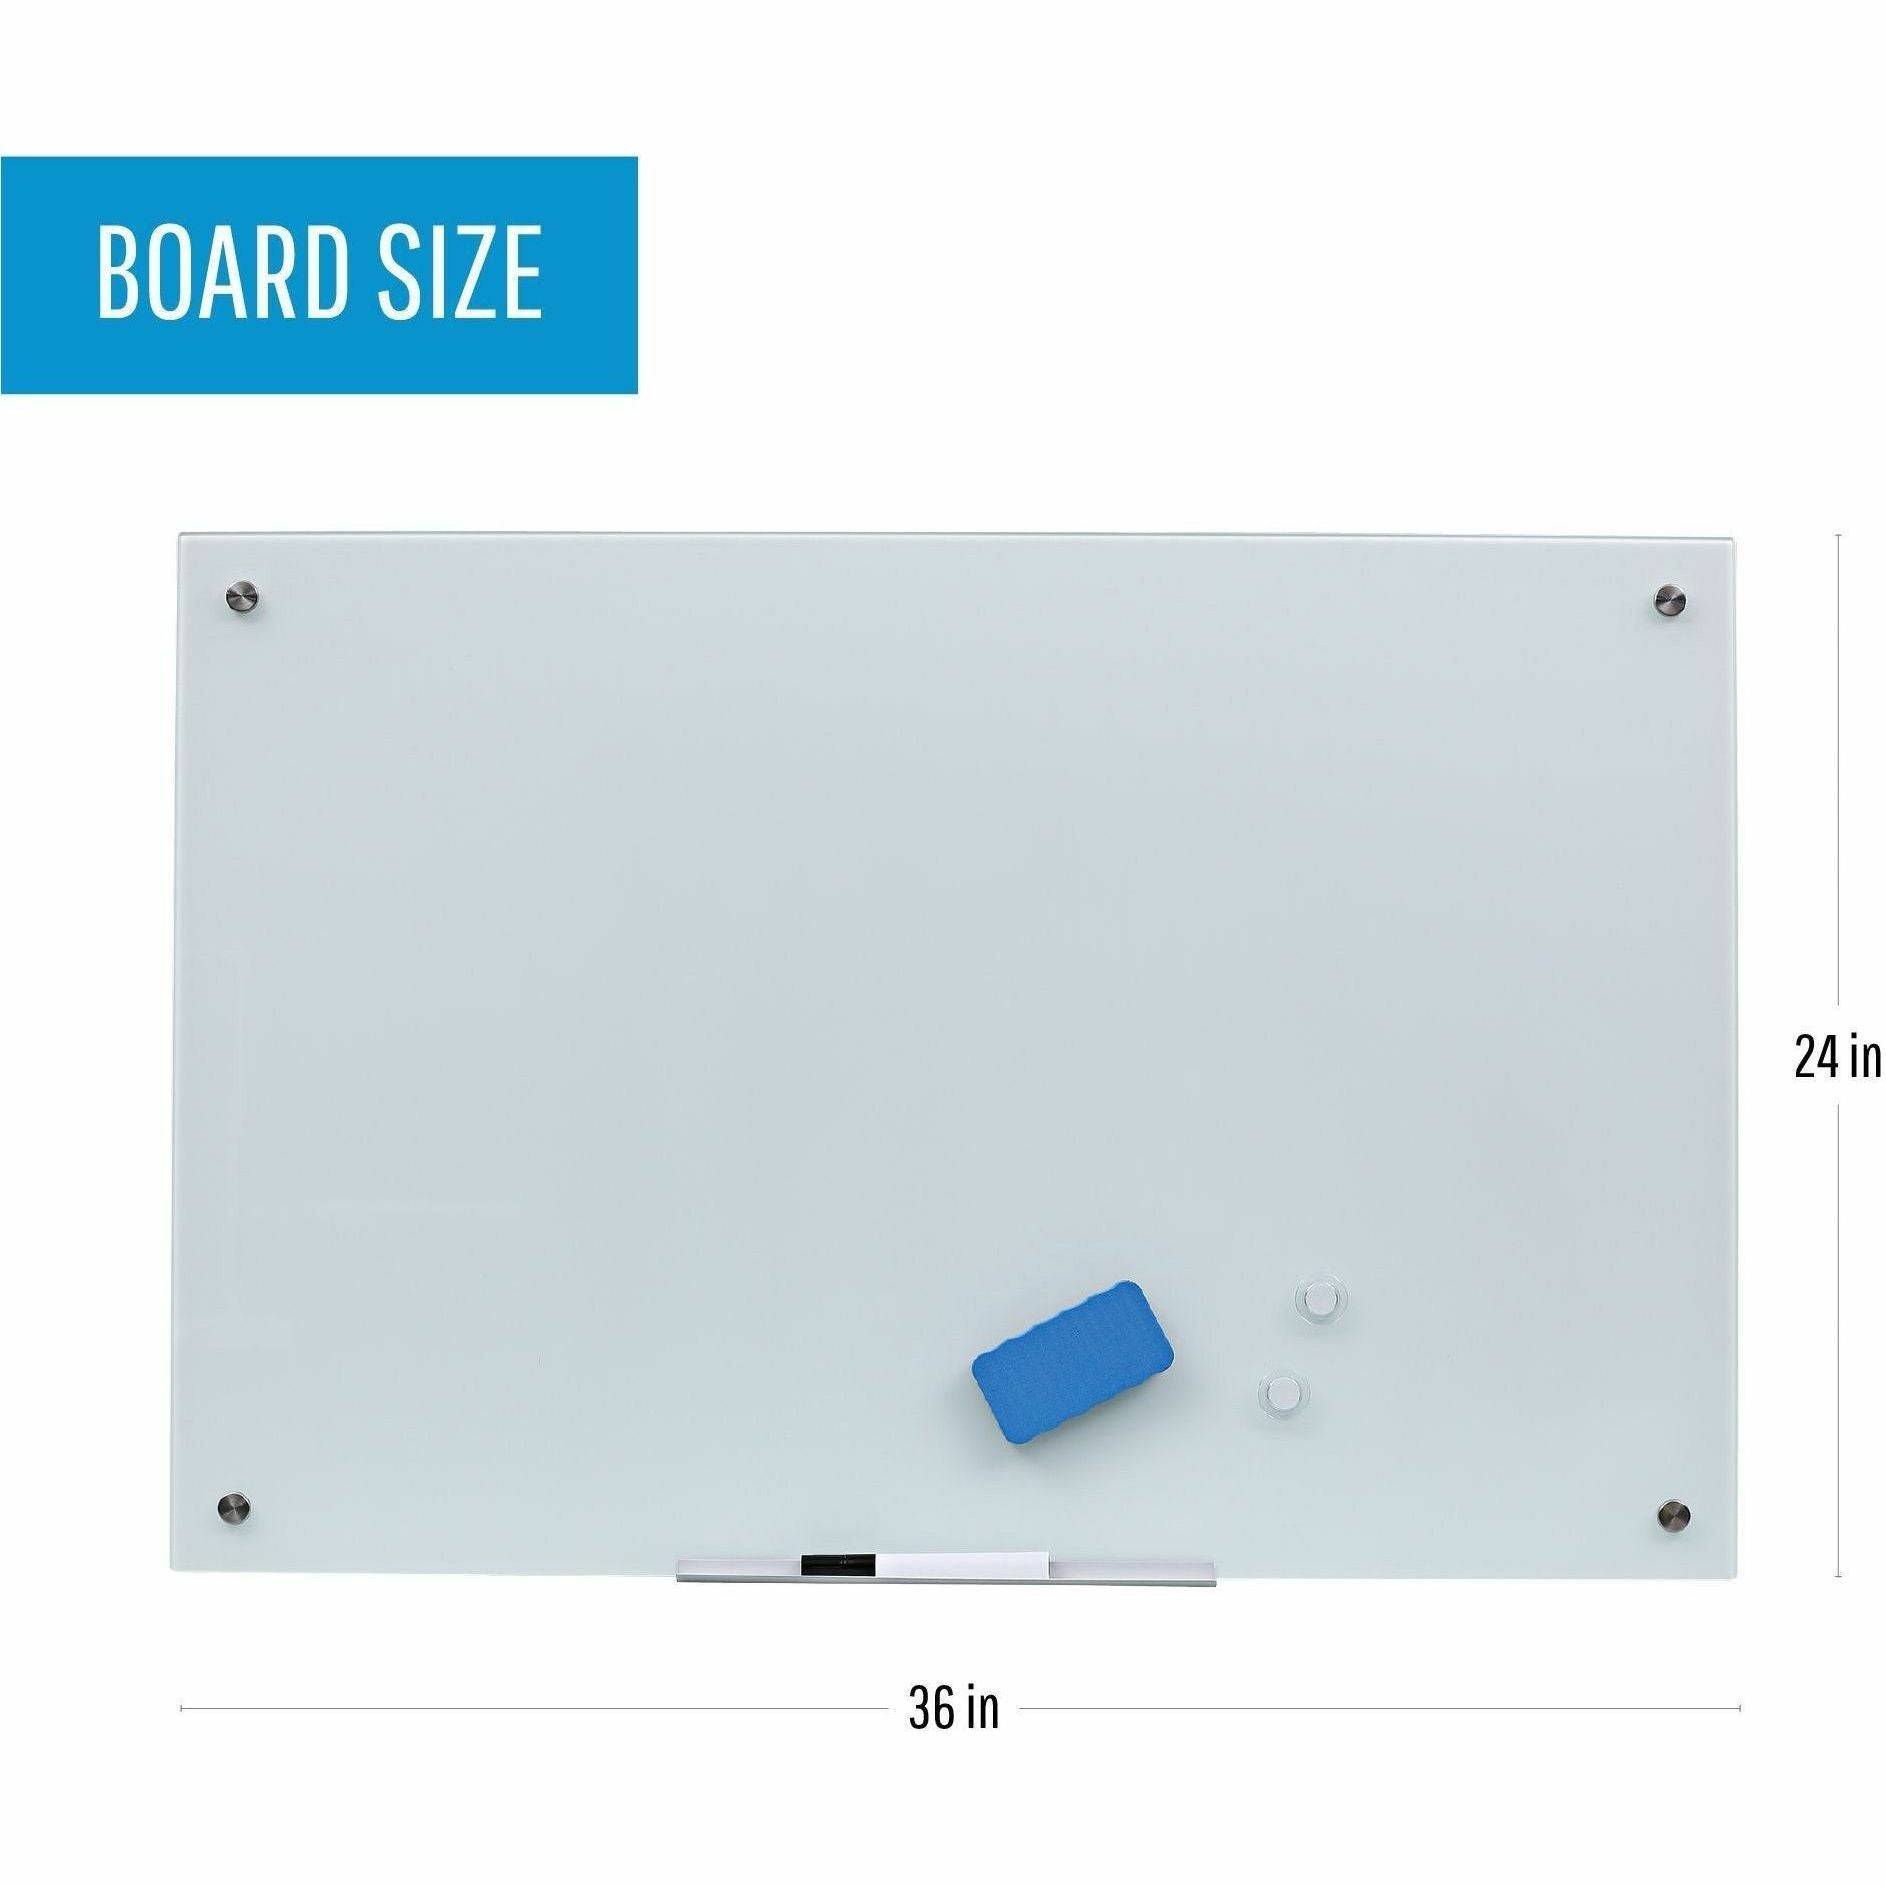 bi-silque-magnetic-glass-dry-erase-board-24-2-ft-width-x-36-3-ft-height-white-glass-surface-rectangle-horizontal-vertical-magnetic-1-each_bvcgl070107 - 3